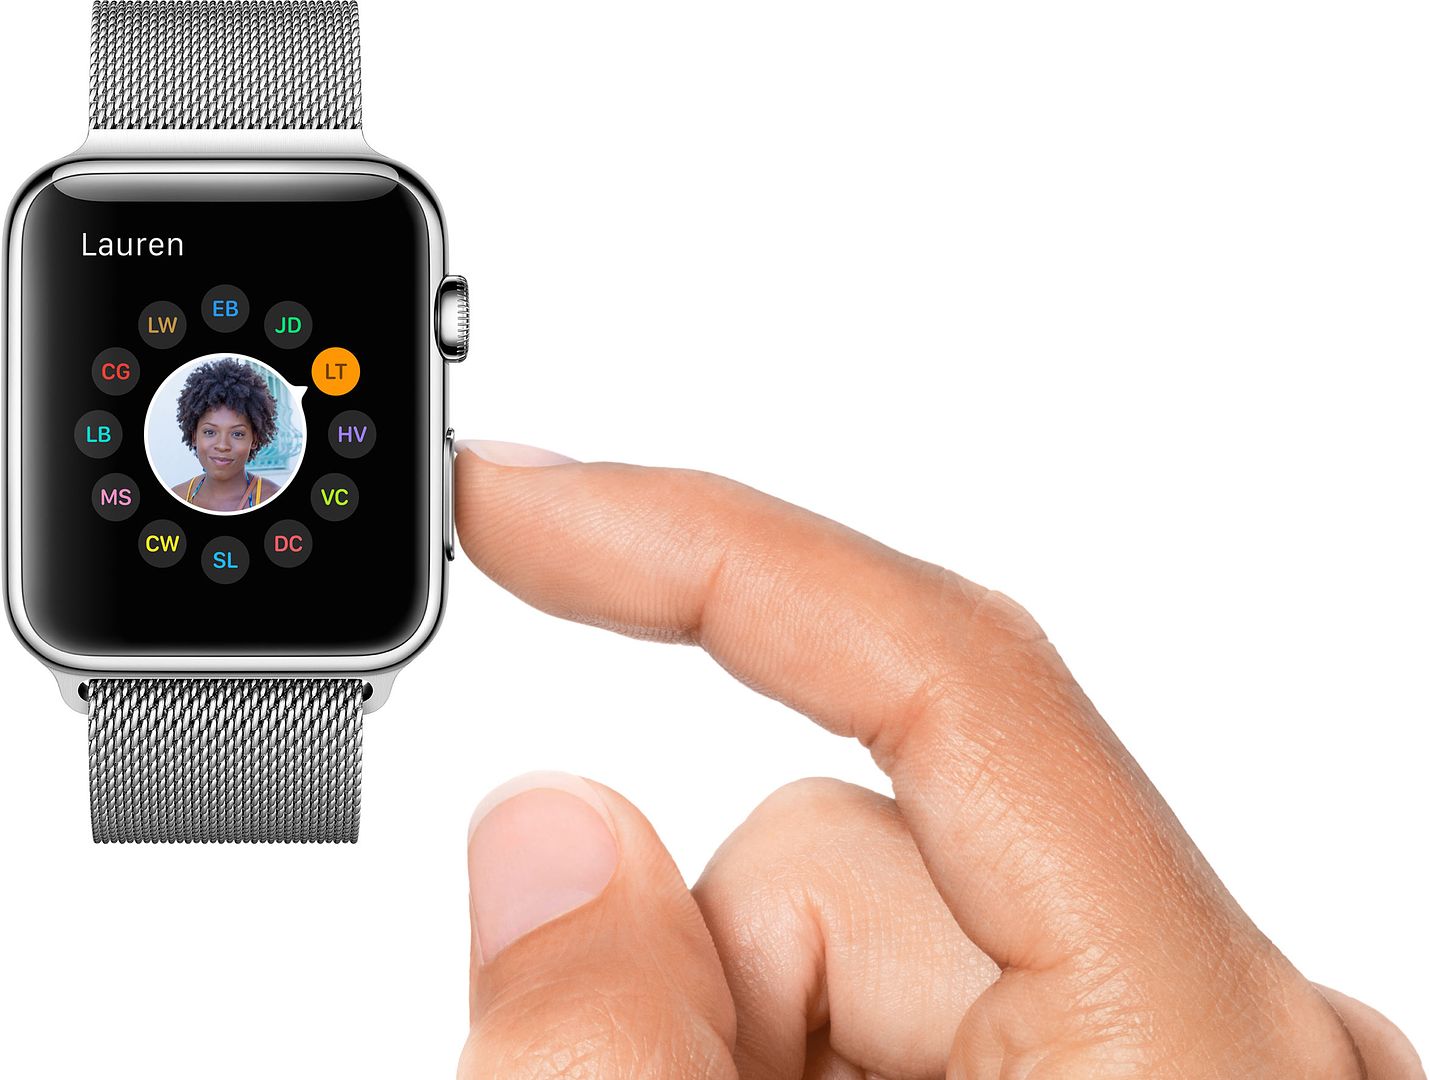 Coolest new tech gadgets of the year: Apple Watch | Cool Mom Tech Editors' Best